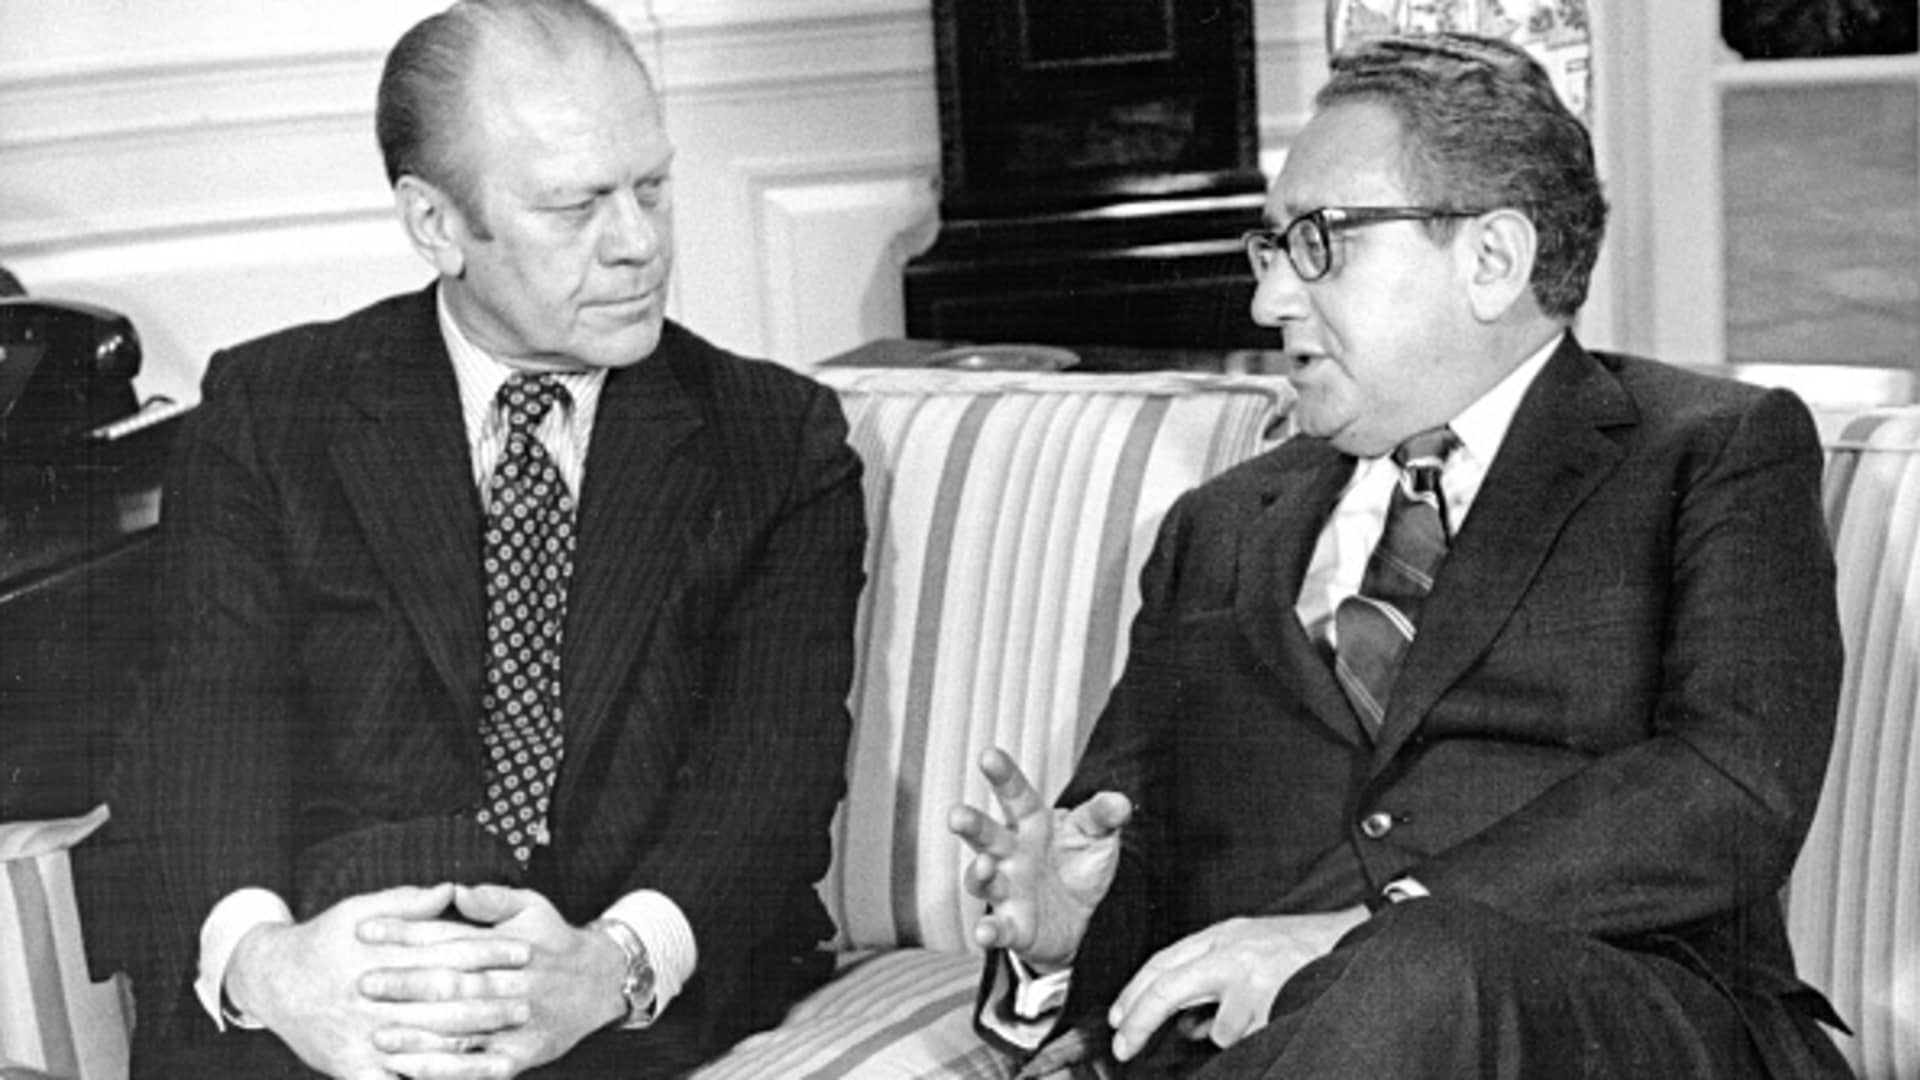 President Gerald Ford (left) and Secretary of State Henry Kissinger talk together in the Oval Office, February 19, 1975. Kissinger had just completed a 10-day trip to the Middle East.